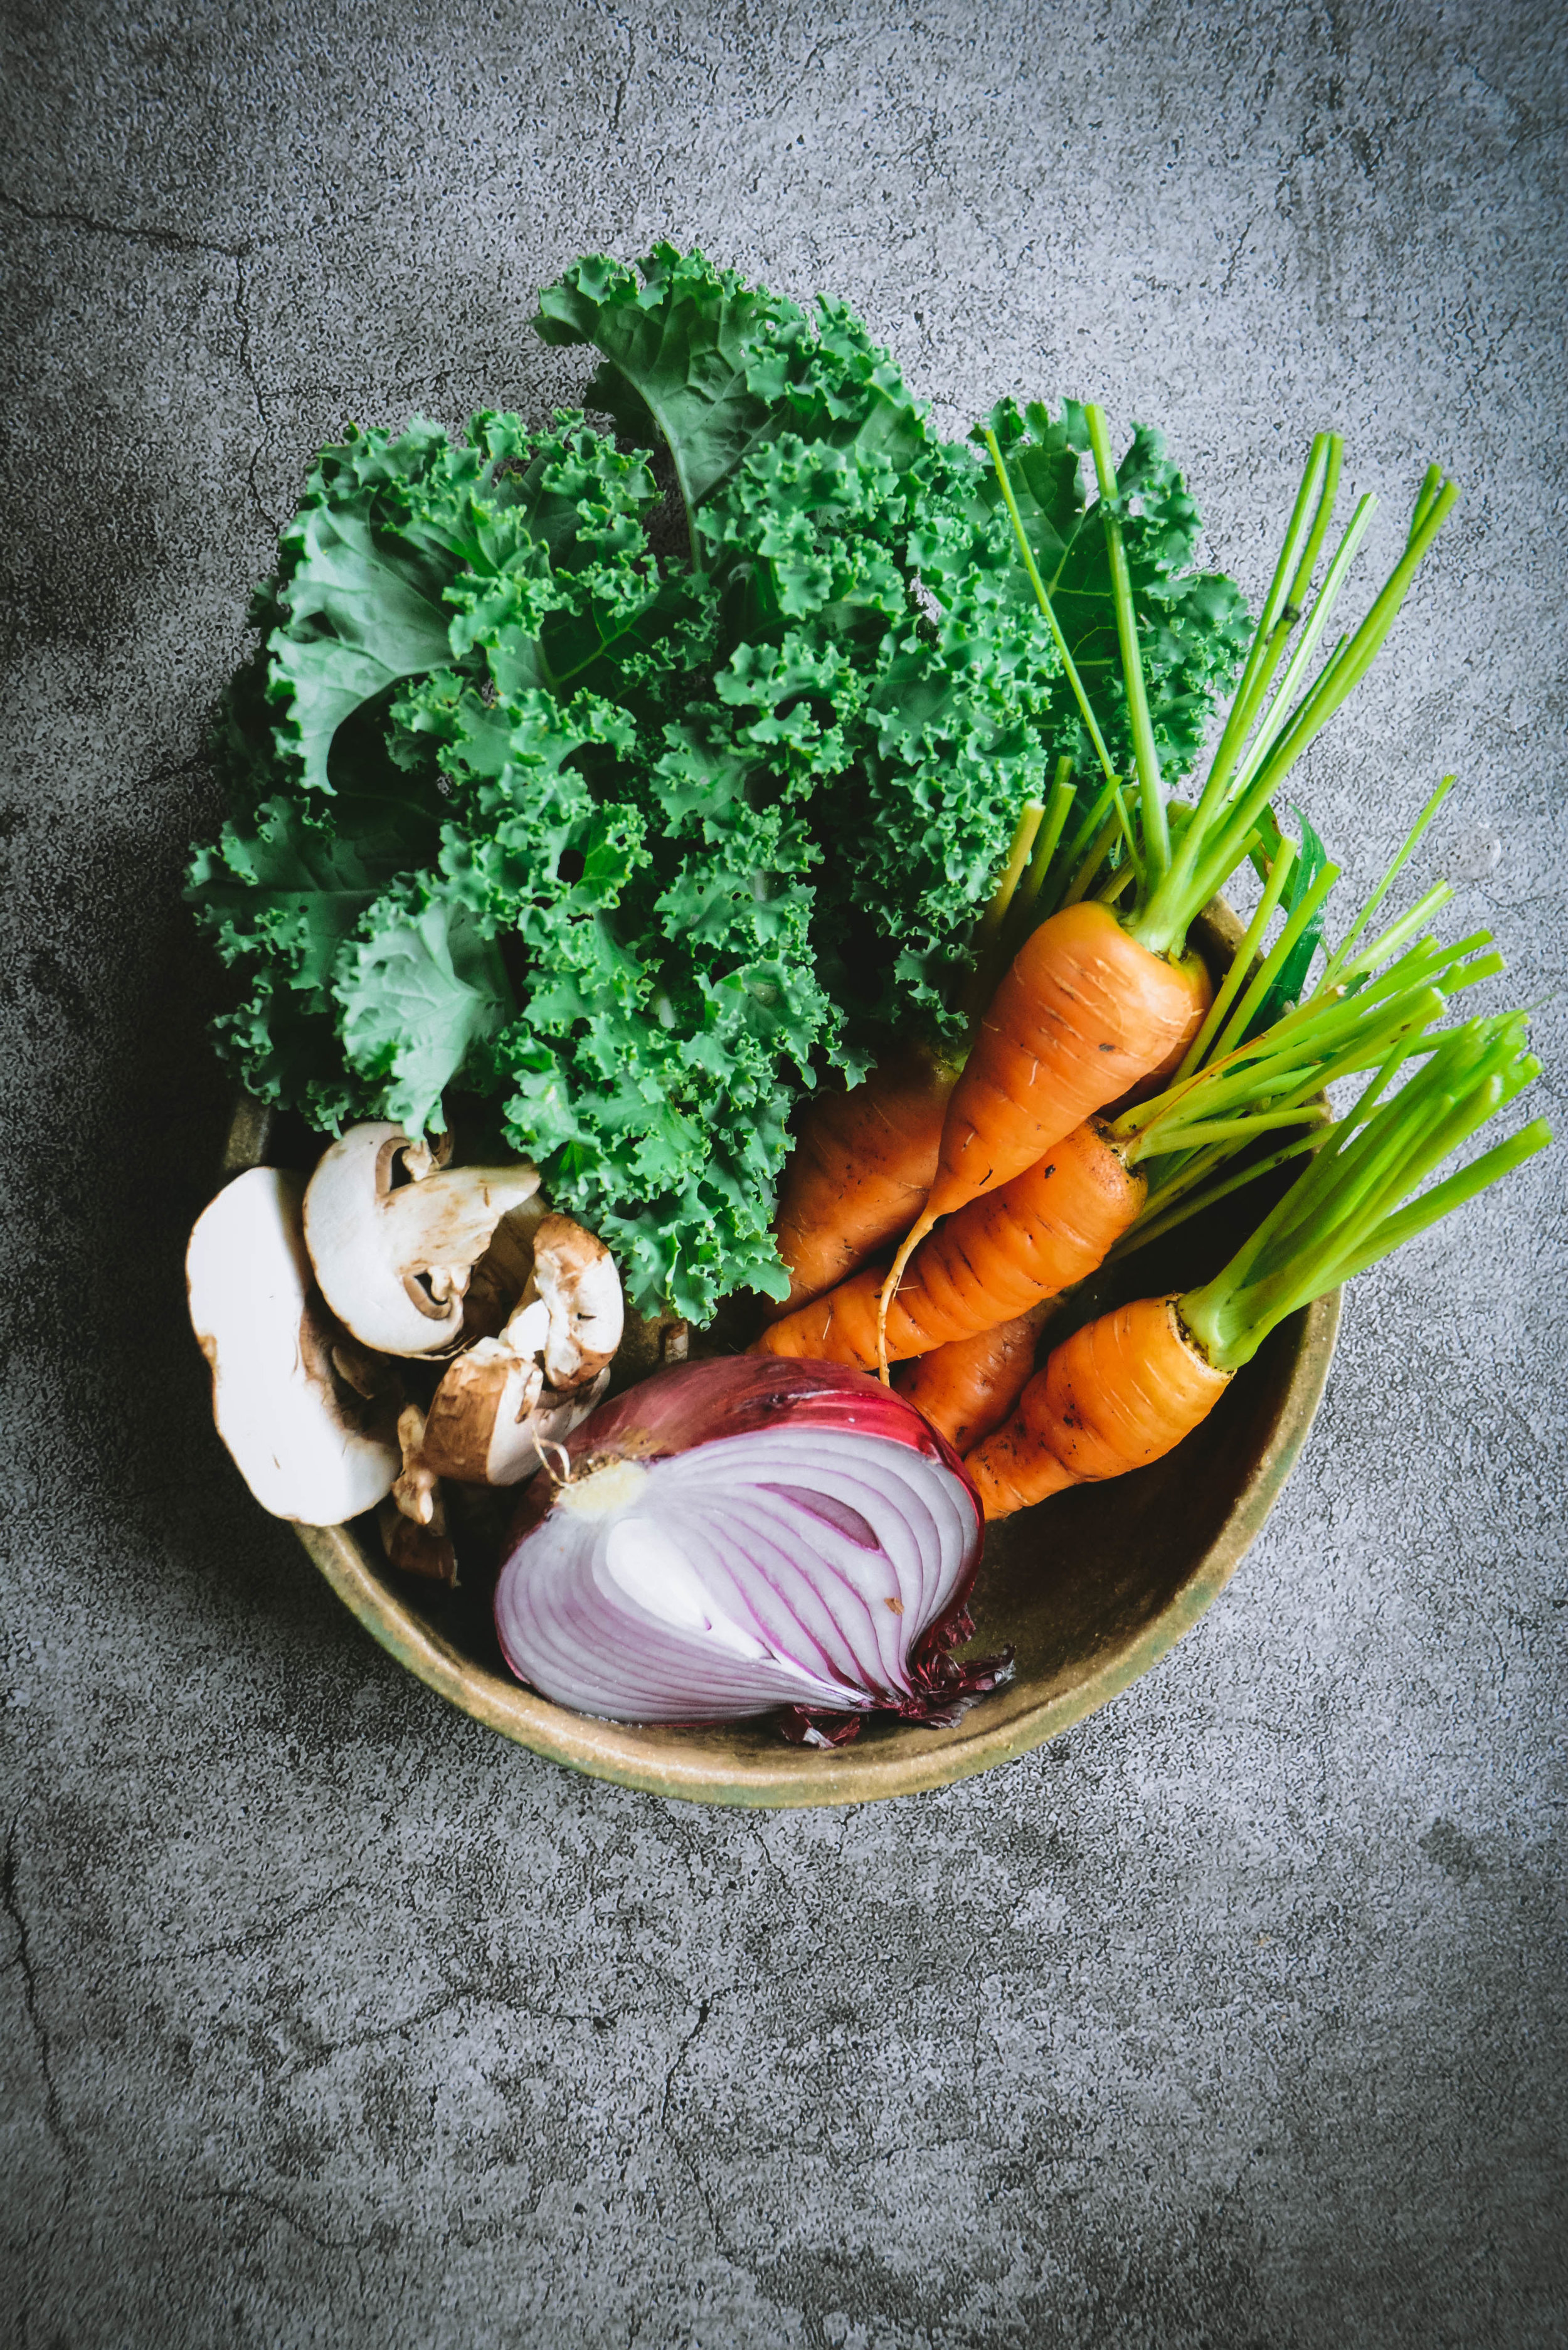 Kale mushrooms, carrots and mushrooms in bowl on table